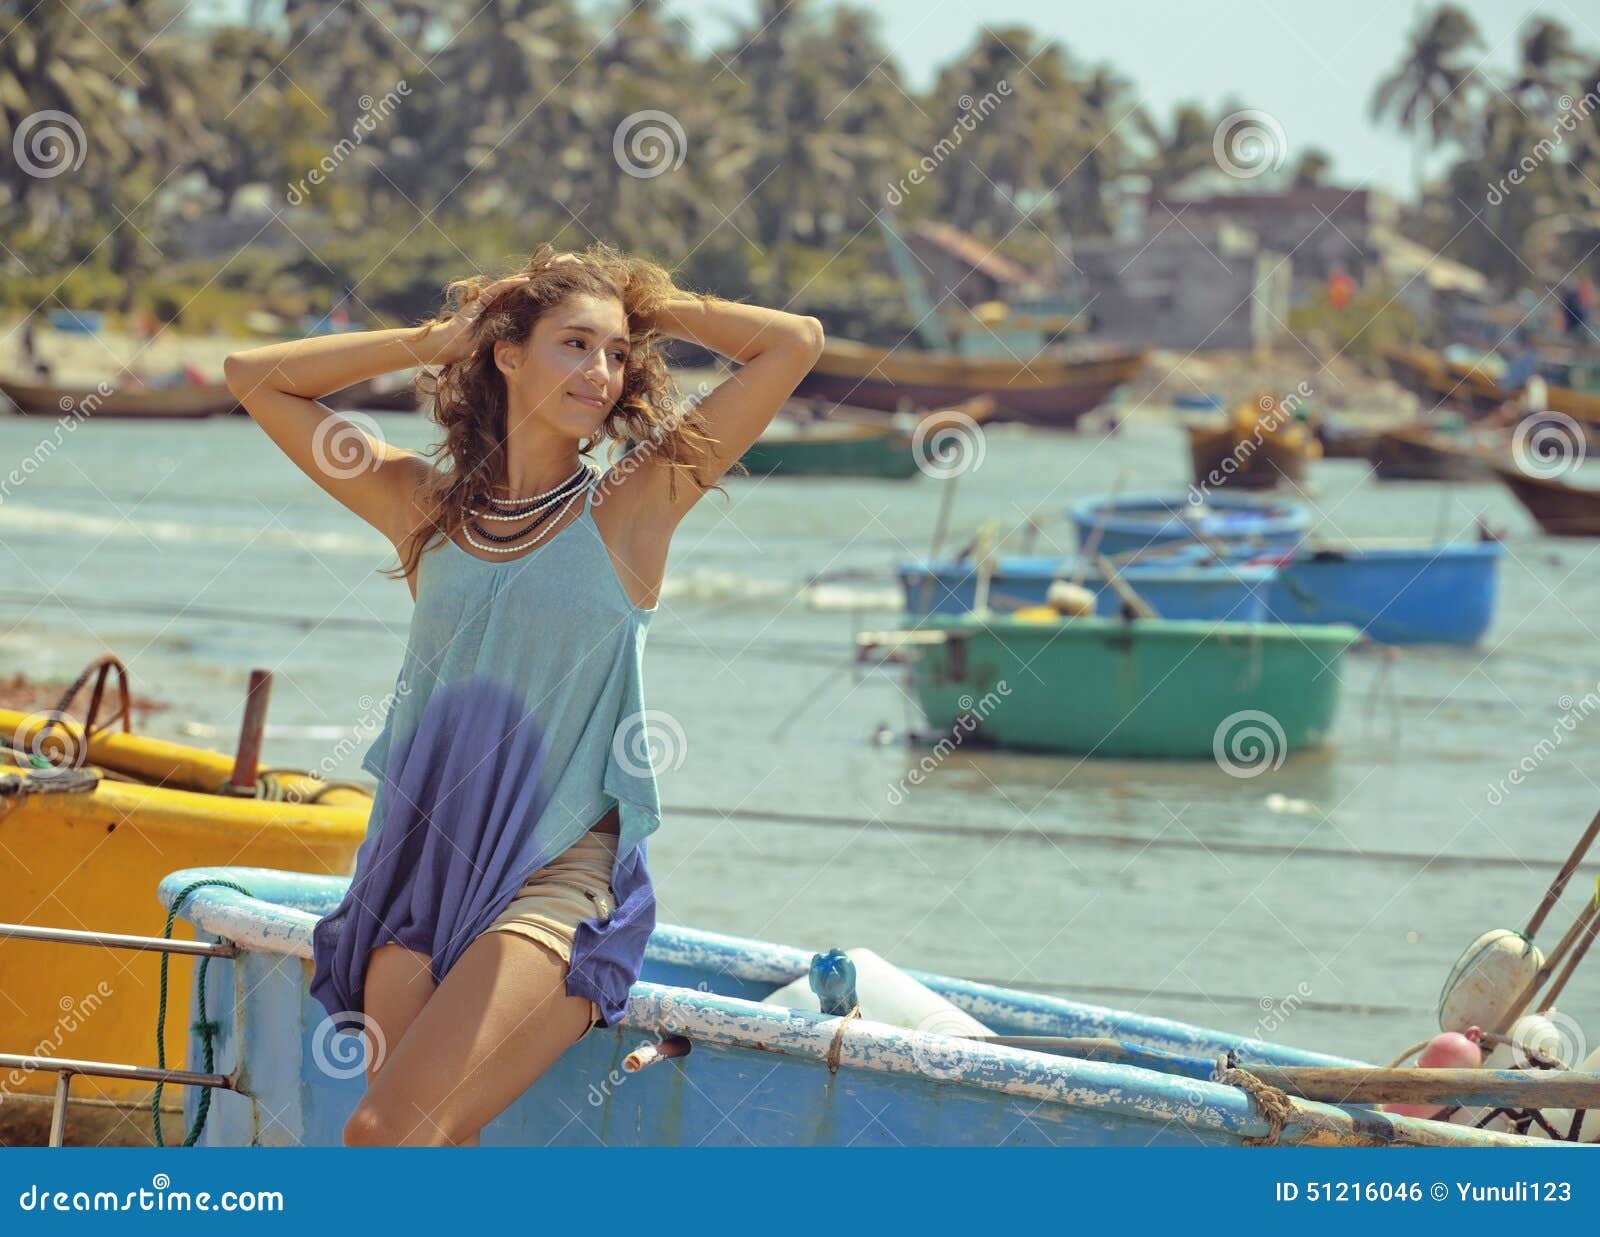 Cute Smiling Young Real Woman in Asian Port Stock Photo - Image of ...